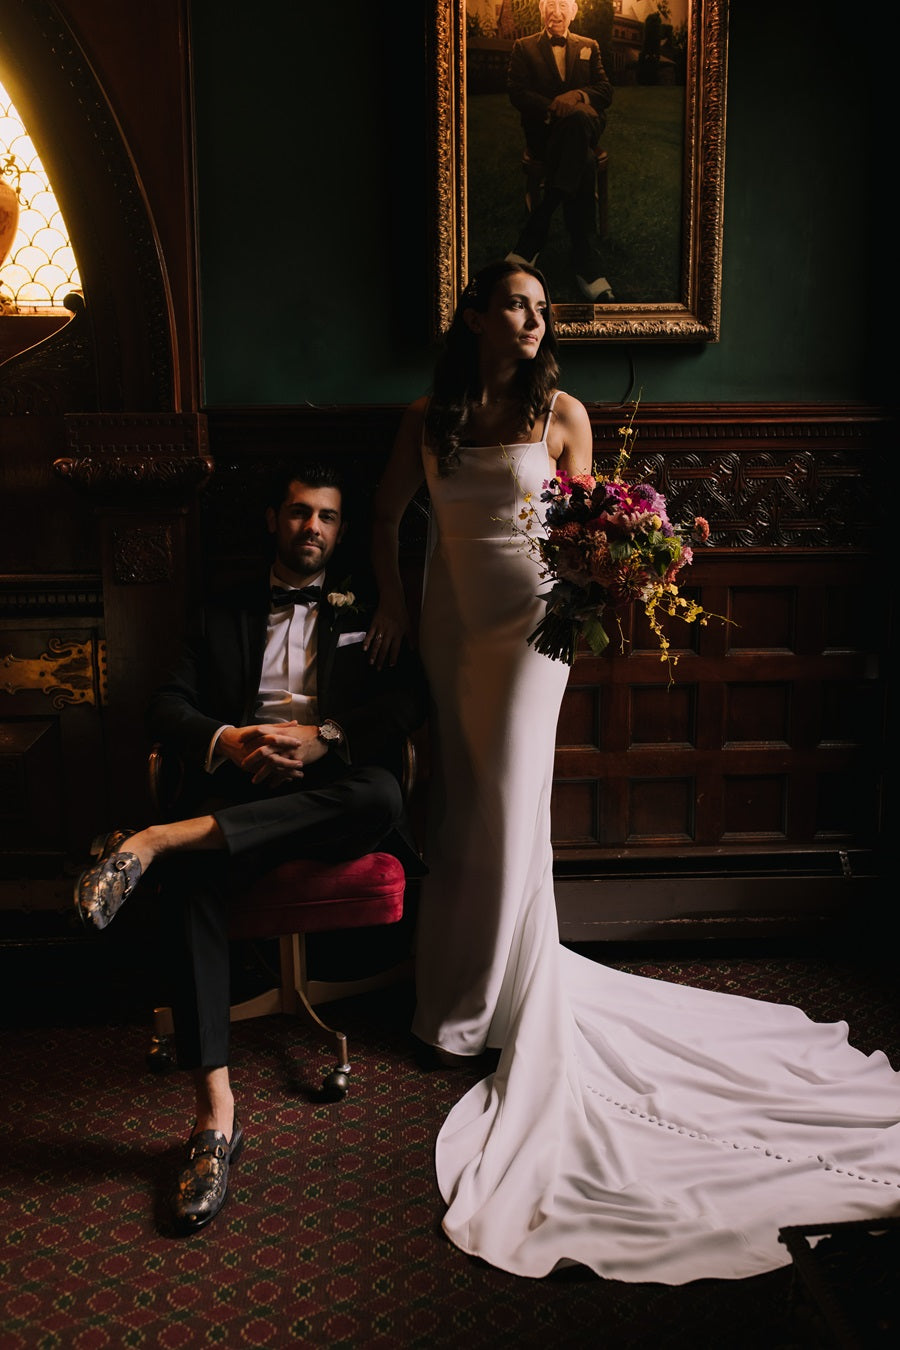 A dramatic shot featuring the bride and groom. Groom is sitting in a chair with the bride standing at his side holding her bridal bouquet. The lighting creates a dark and moody atmosphere, at Belhurst Castle